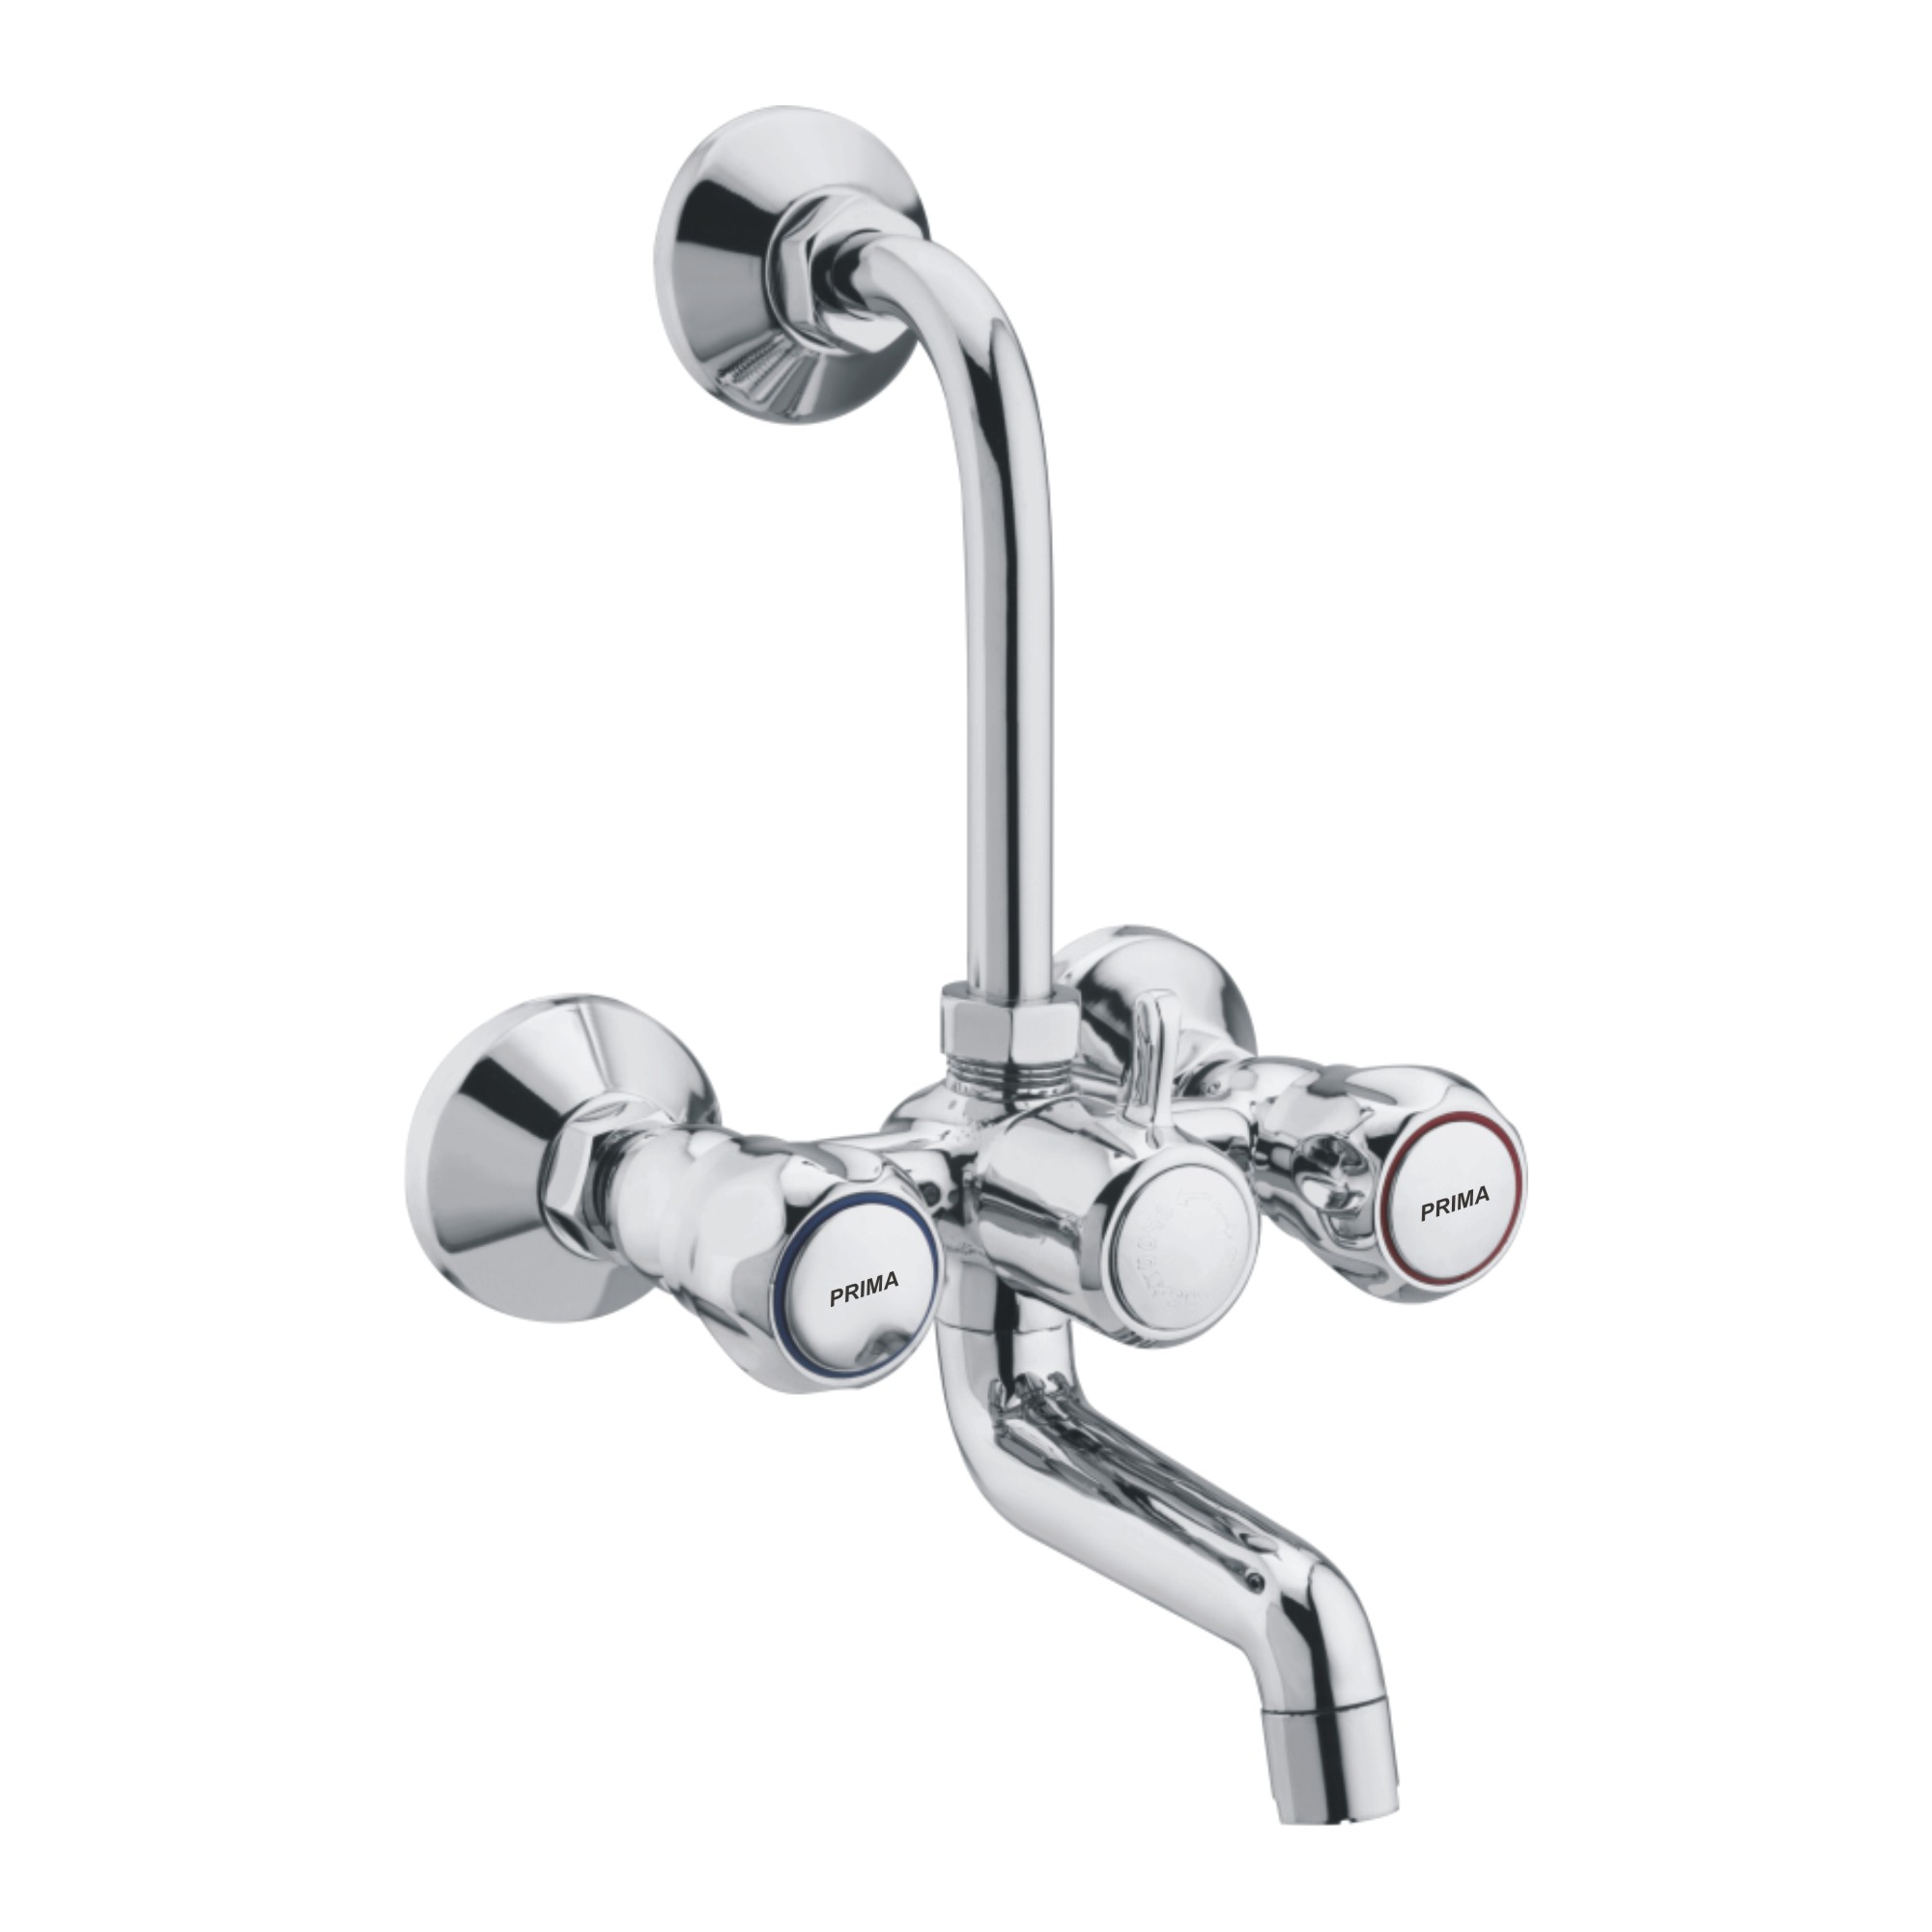 C.P Wall Mixer Tele With L Bend Pipe & Flange